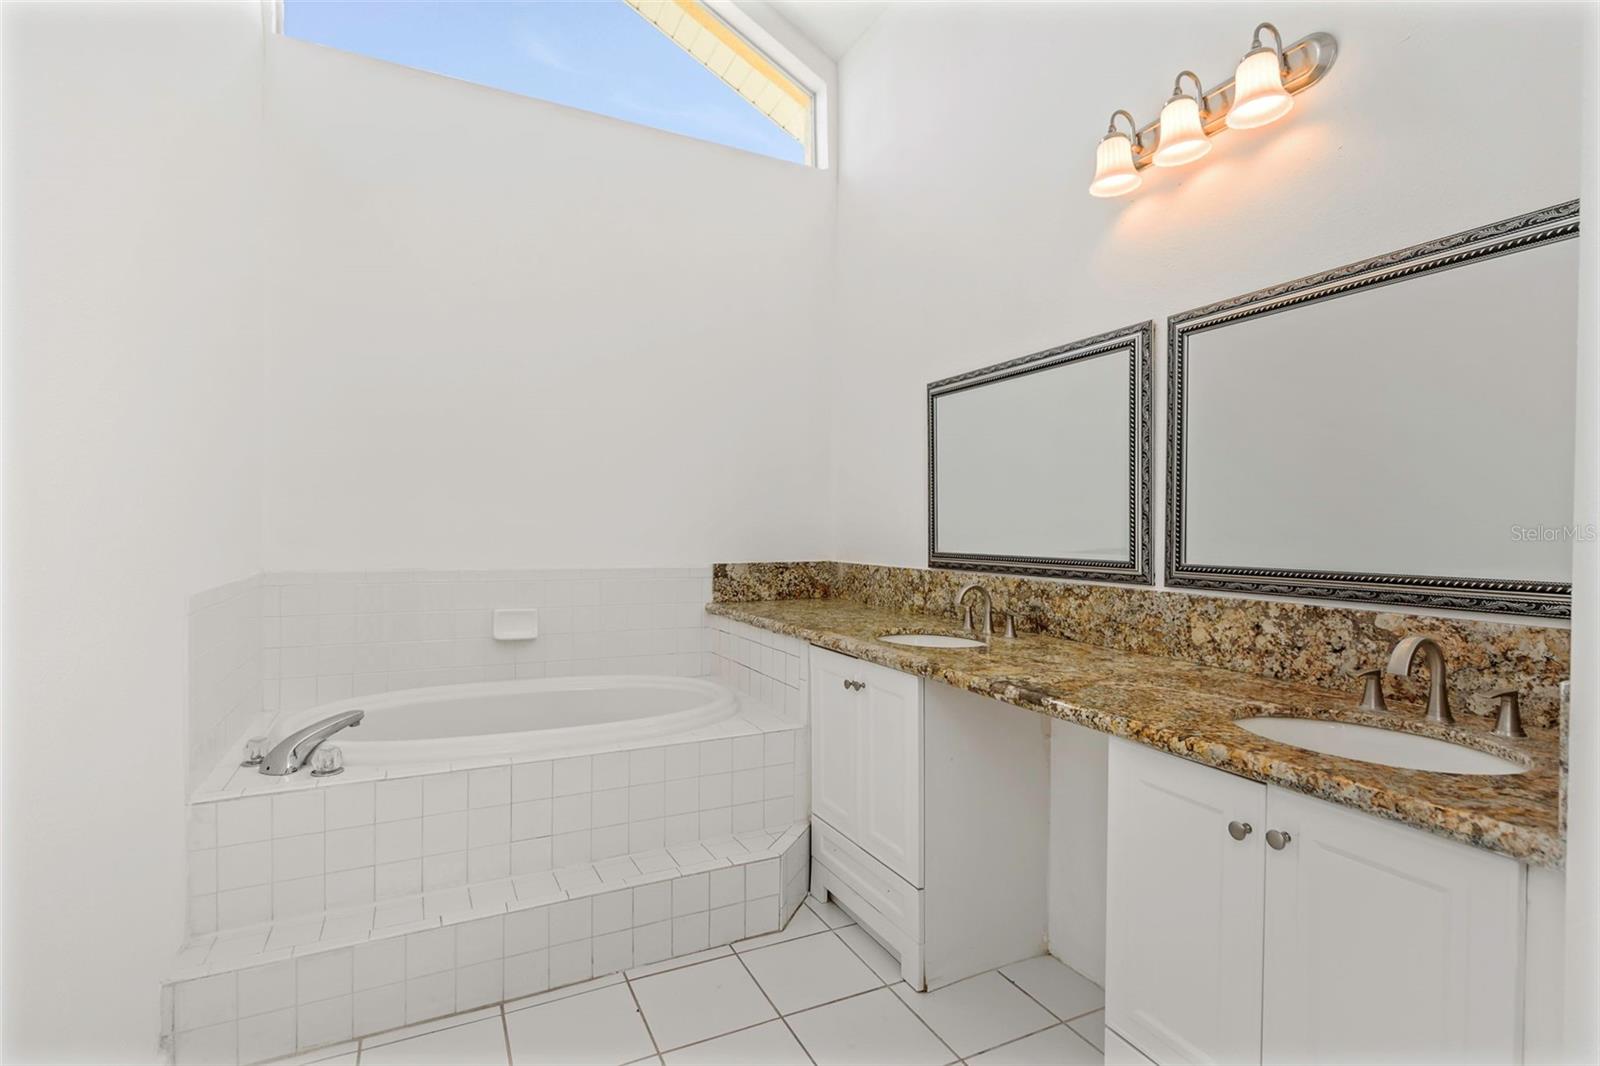 Ensuite Bath with double sinks